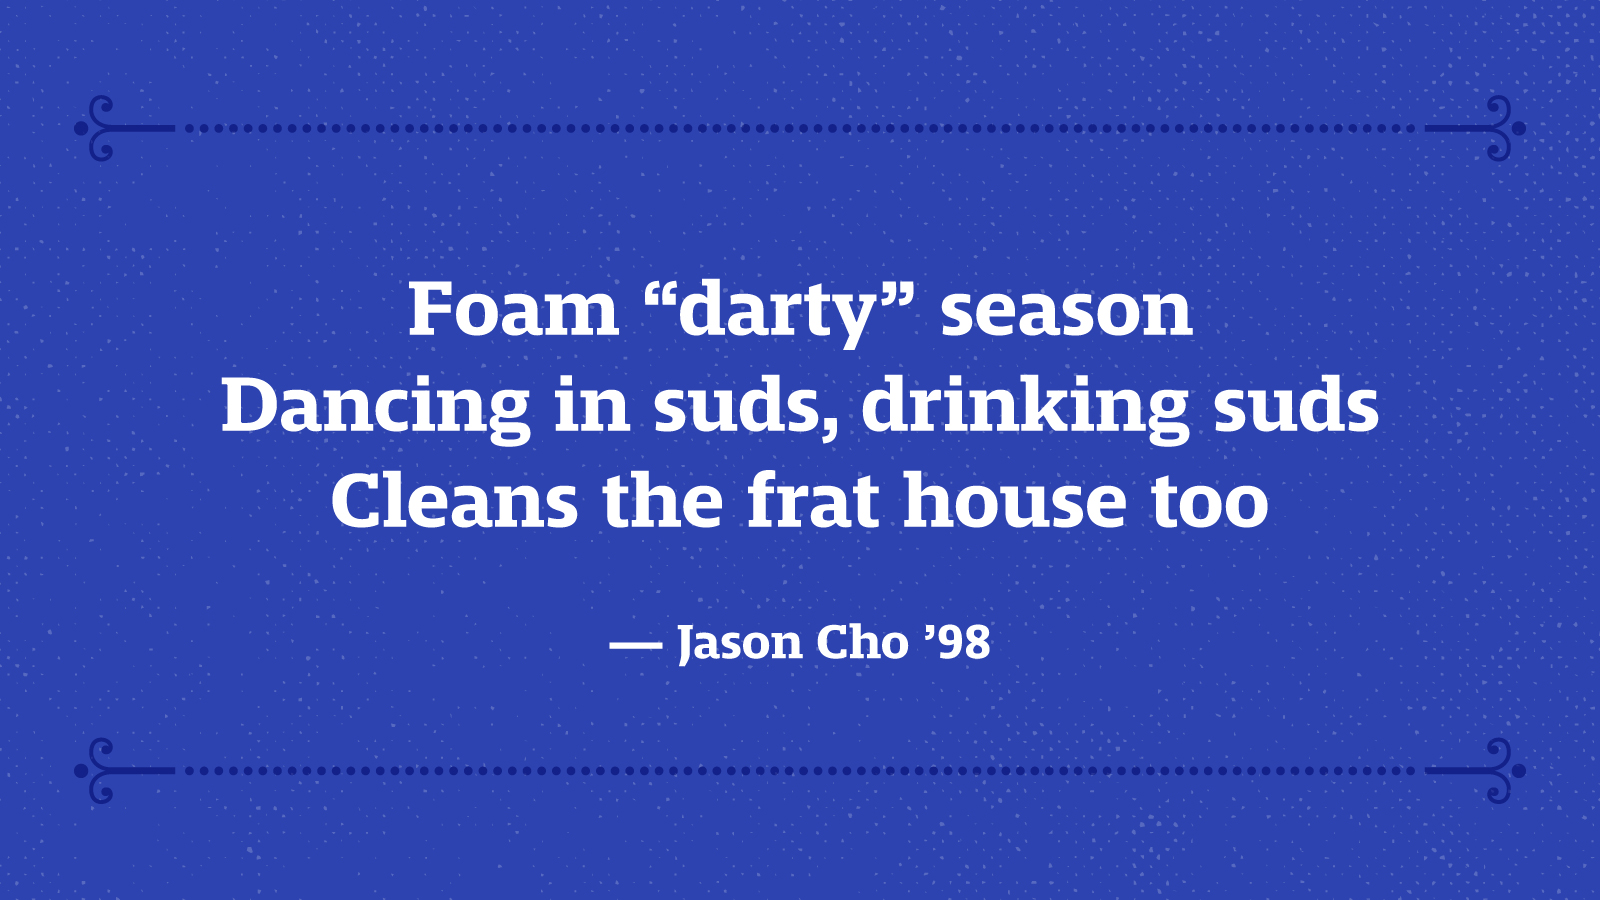 Foam “darty” season Dancing in suds, drinking suds Cleans the frat house too — Jason Cho ’98